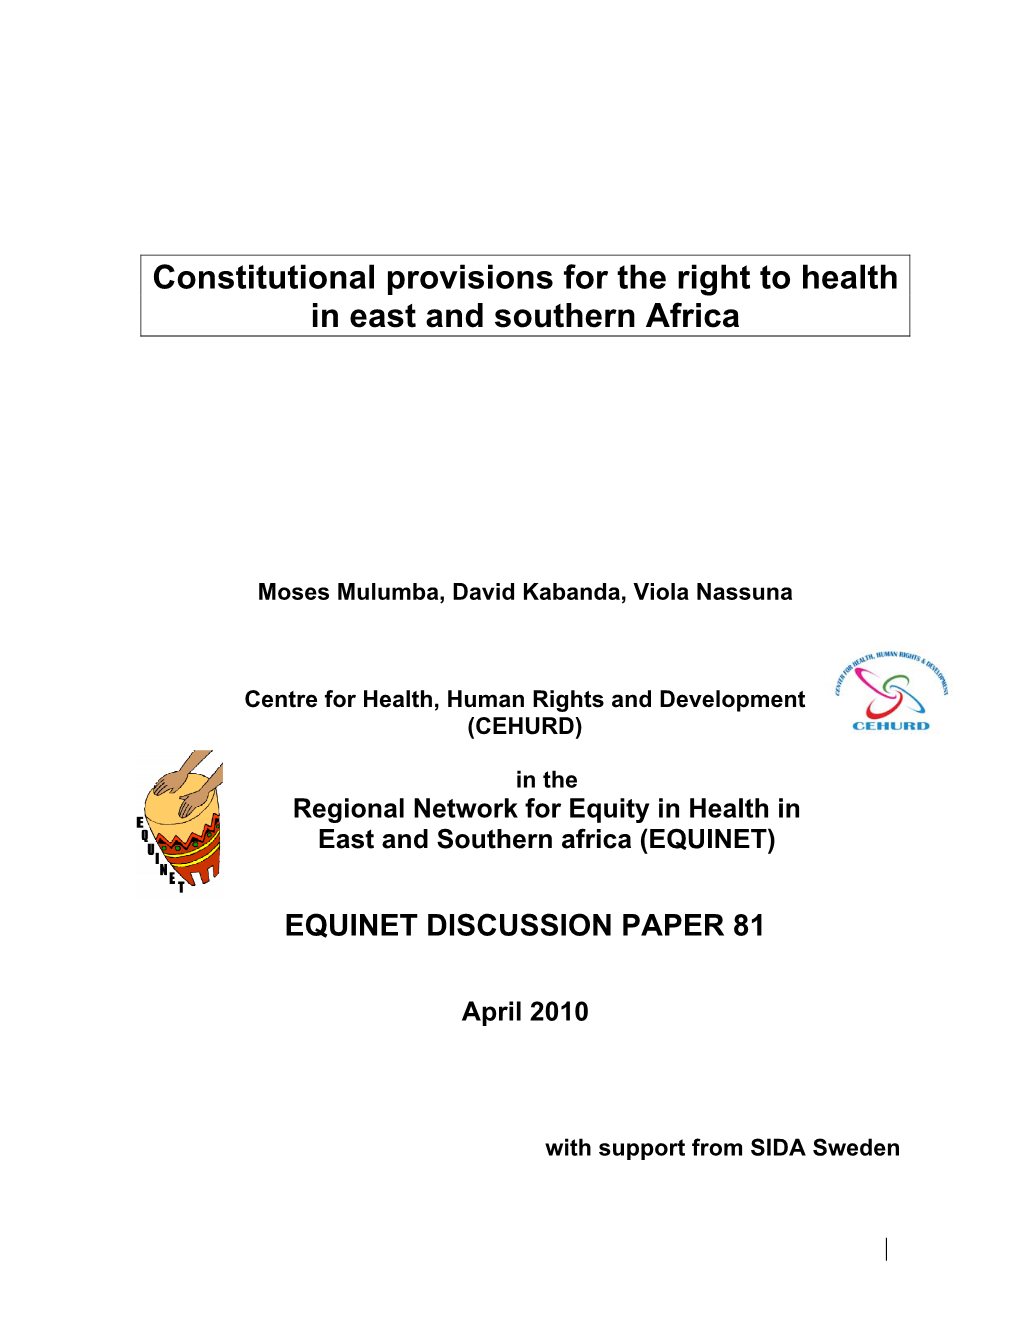 Constitutional Provisions for the Right to Health in East and Southern Africa